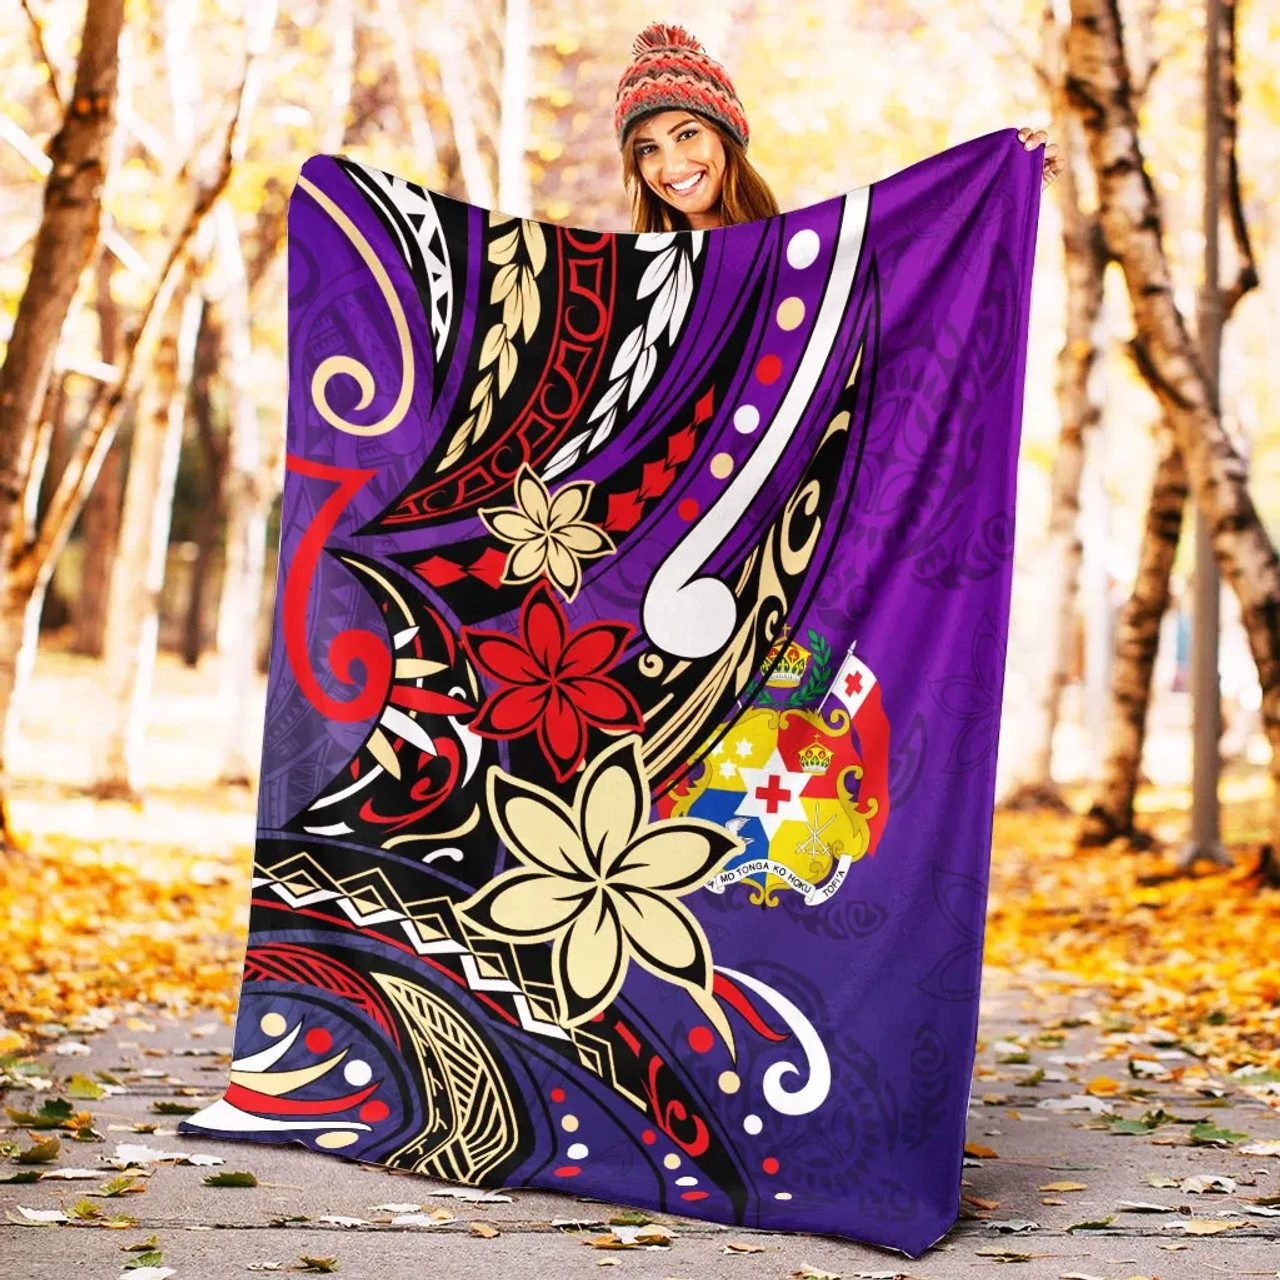 Tonga Premium Blanket - Tribal Flower With Special Turtles Purple Color 4